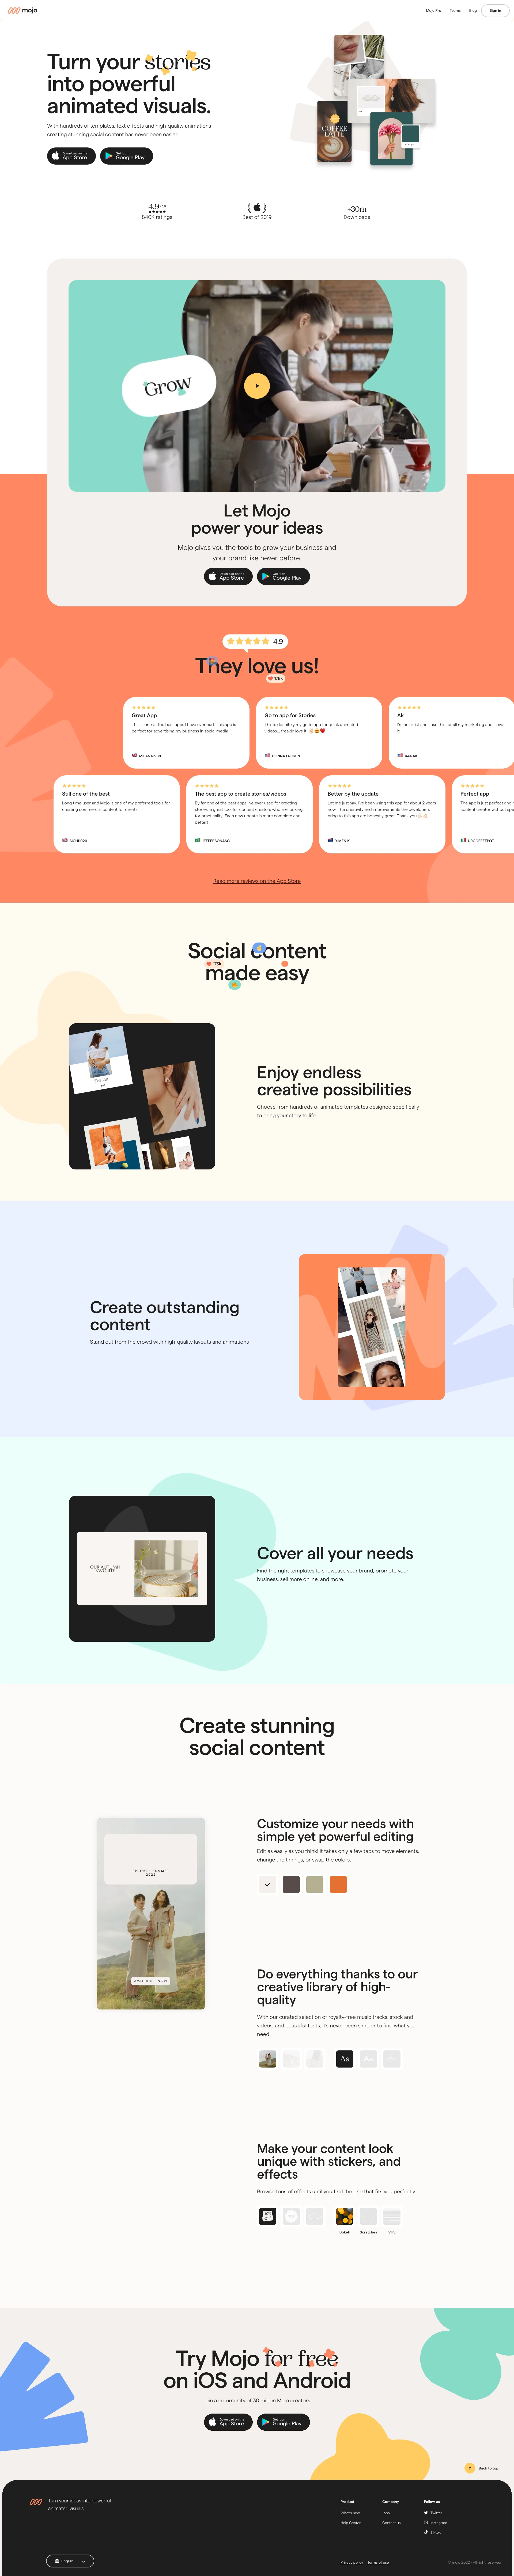 Mojo Landing Page Example: Turn your ideas into powerful animated visuals. With hundreds of templates, text effects and high-quality animations - creating stunning social content has never been easier.